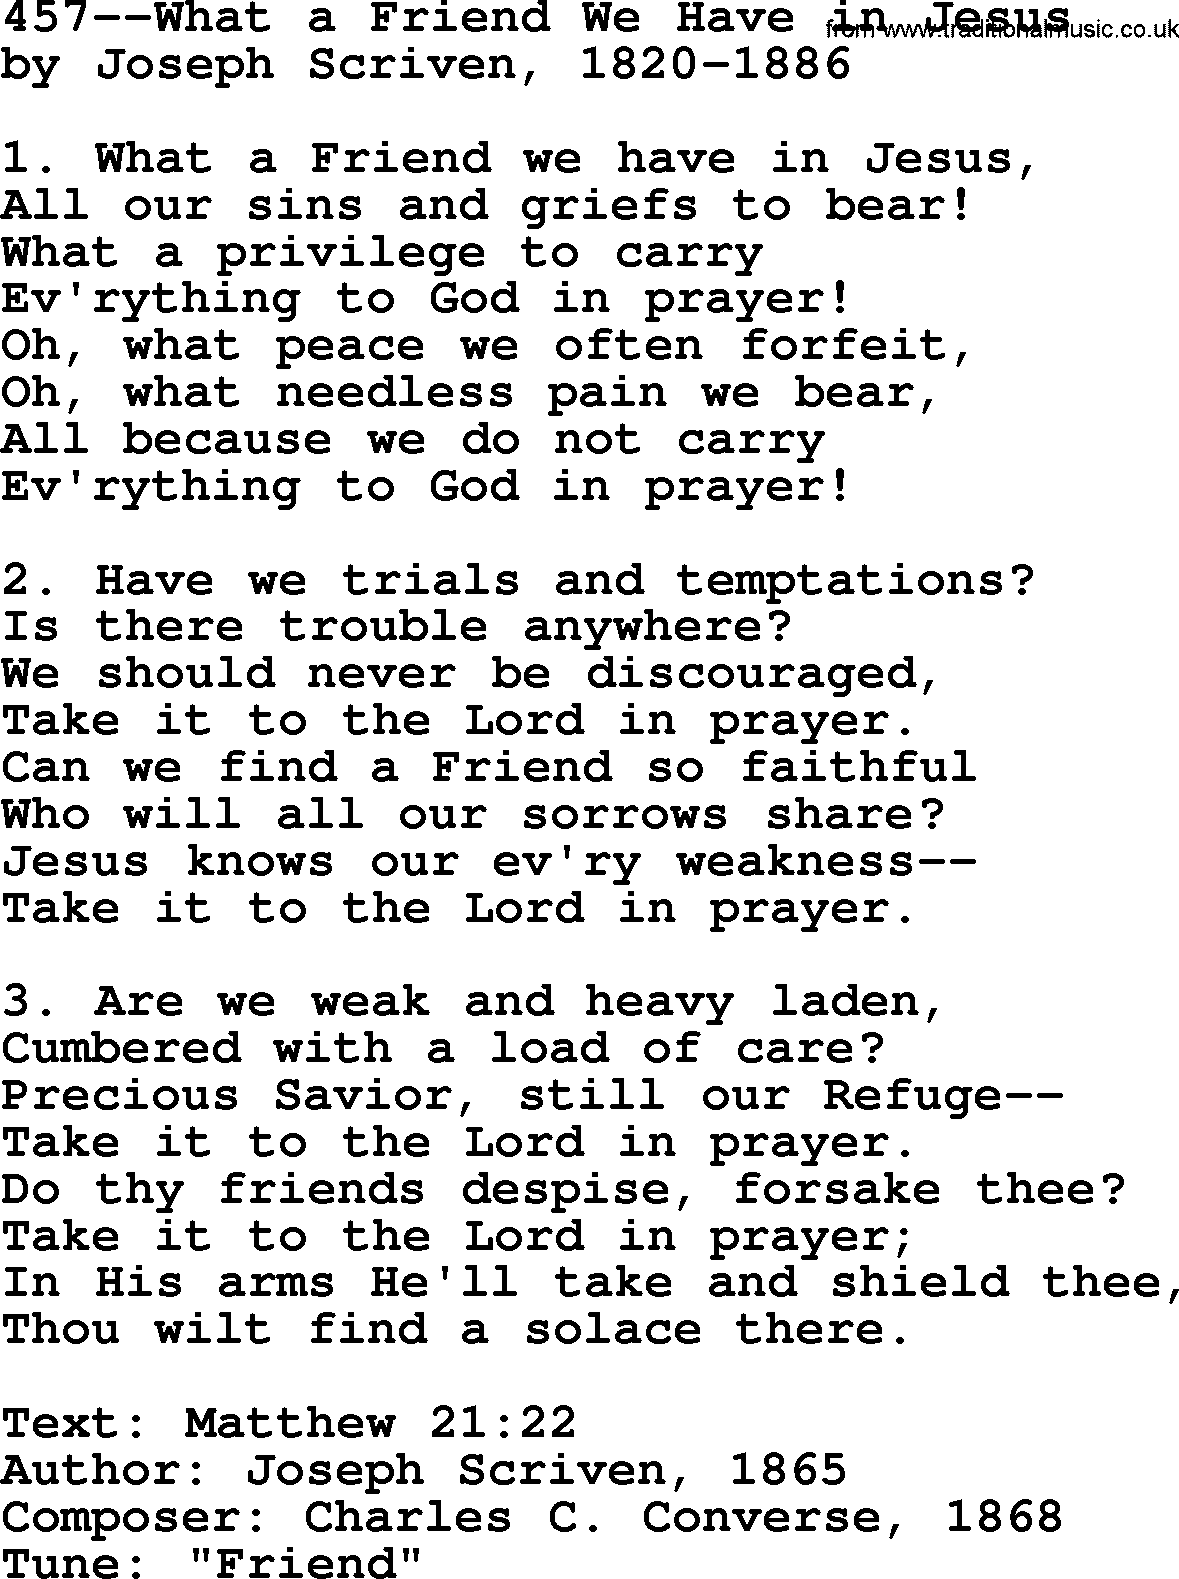 Lutheran Hymn: 457--What a Friend We Have in Jesus.txt lyrics with PDF